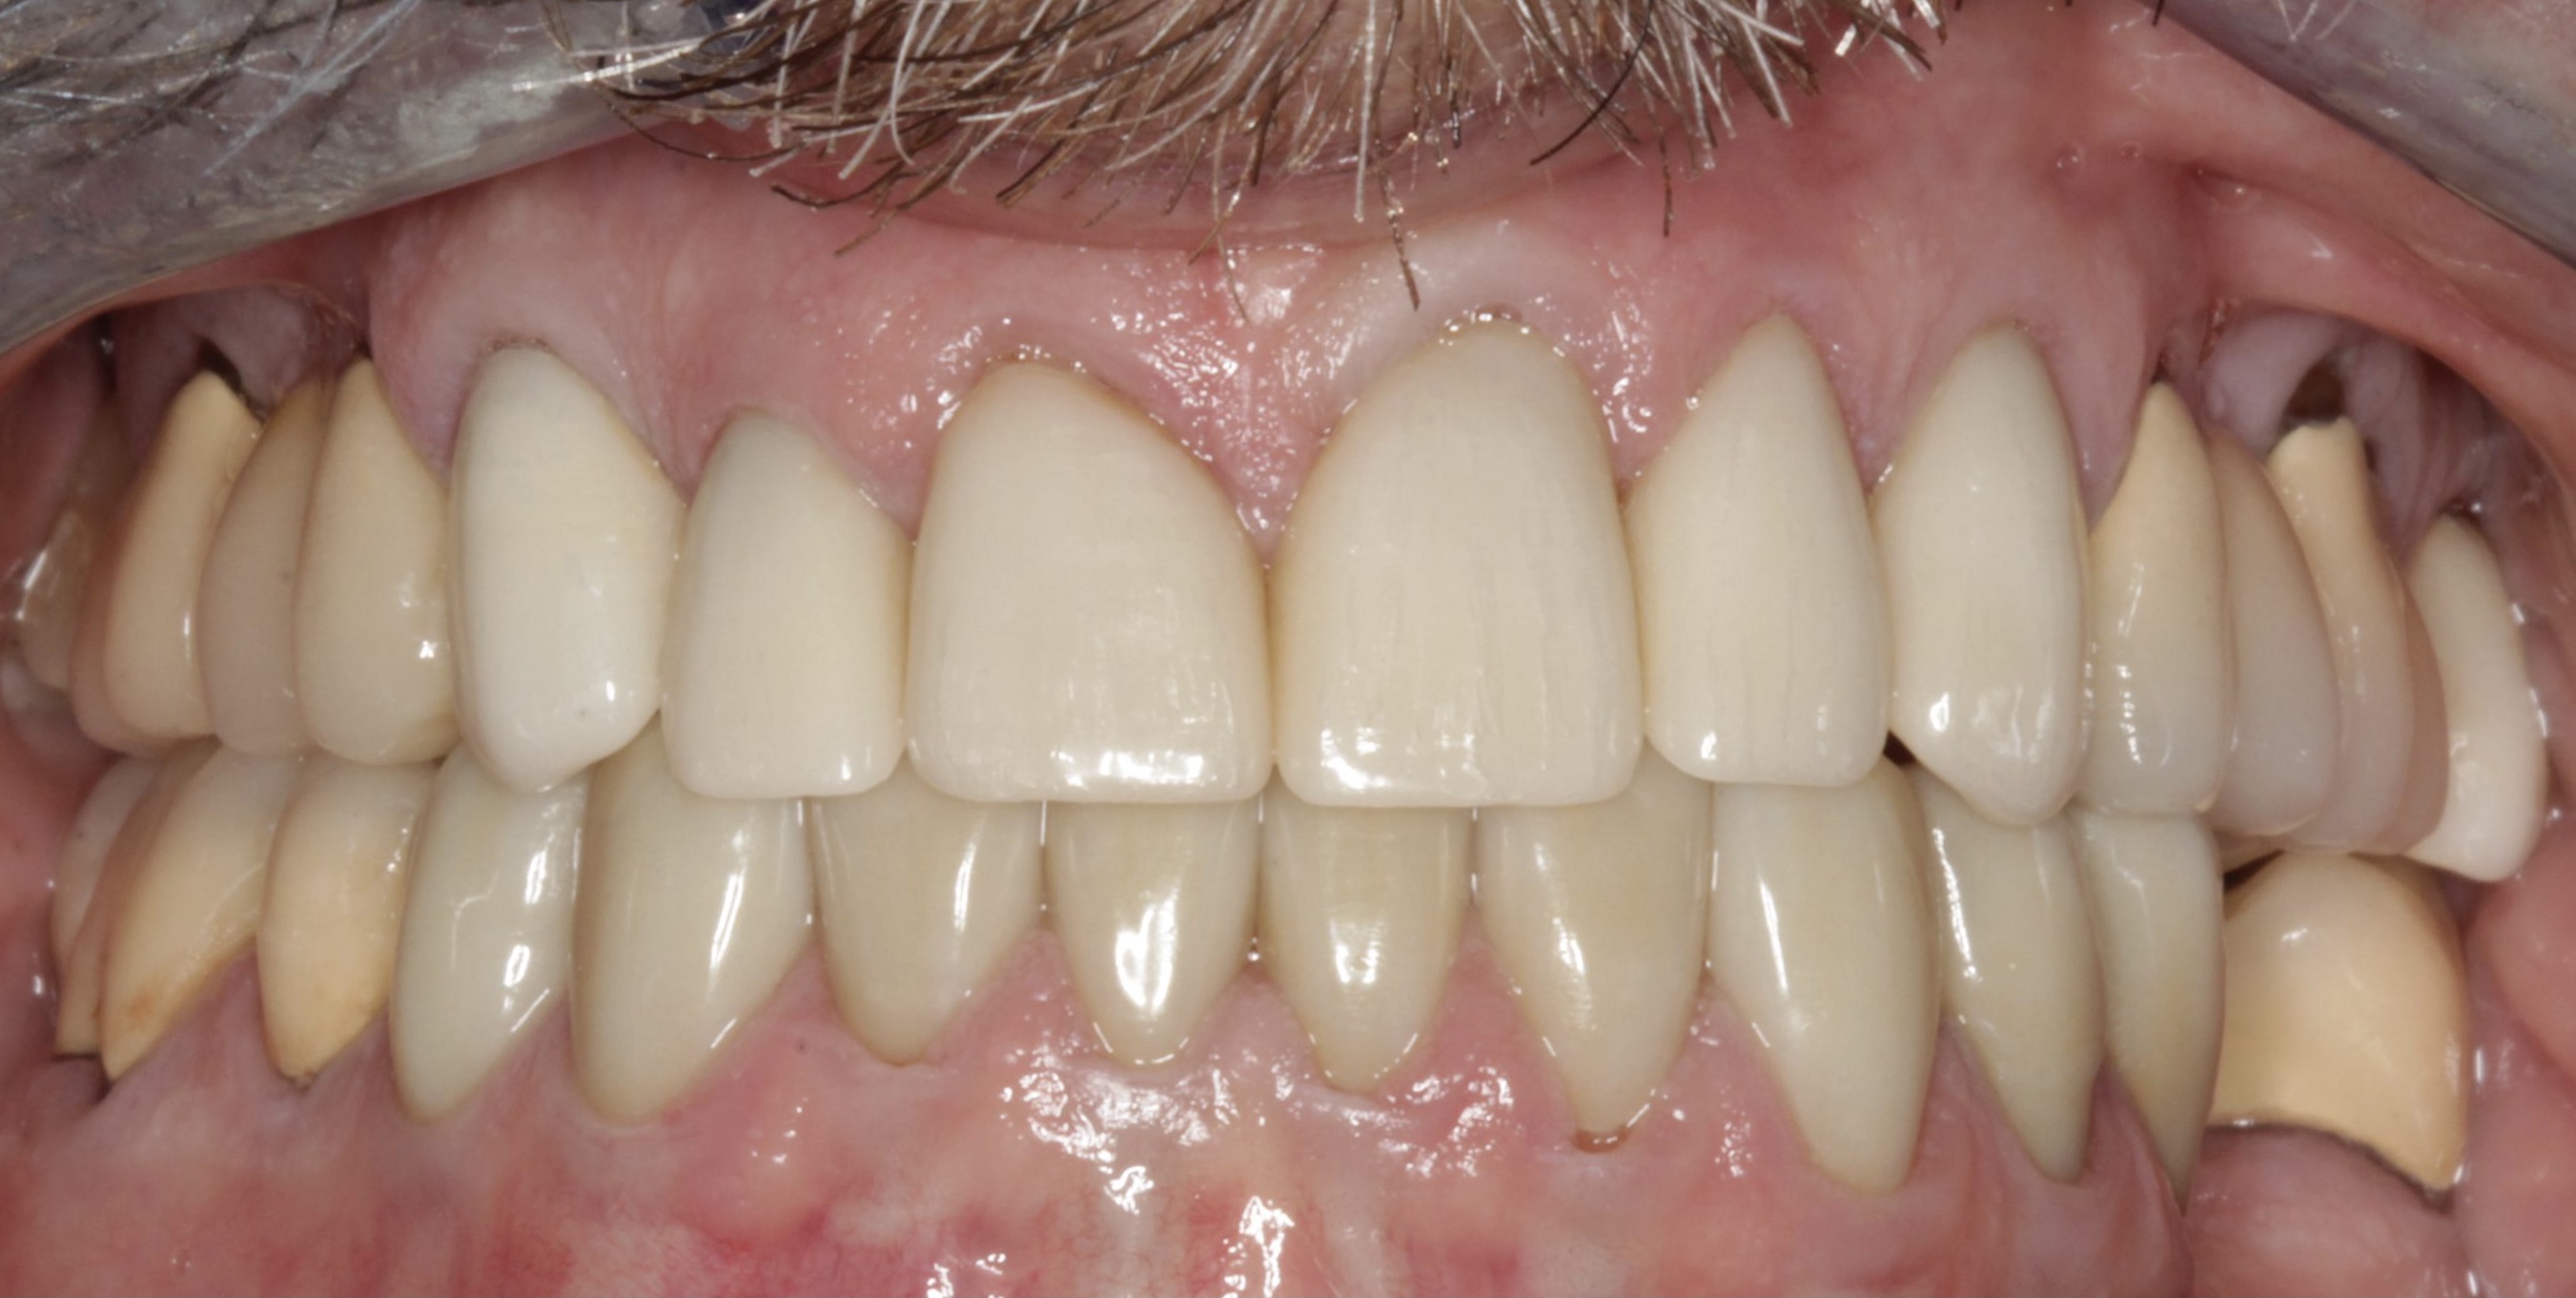 Patient case features All-Z crown restorations on 6-11 and 22-28.  All-Z is a full contour 100% zirconia crown and bridge material designed and milled utilizing CAD/CAM technology with no porcelain overlay. | Pro-Craft